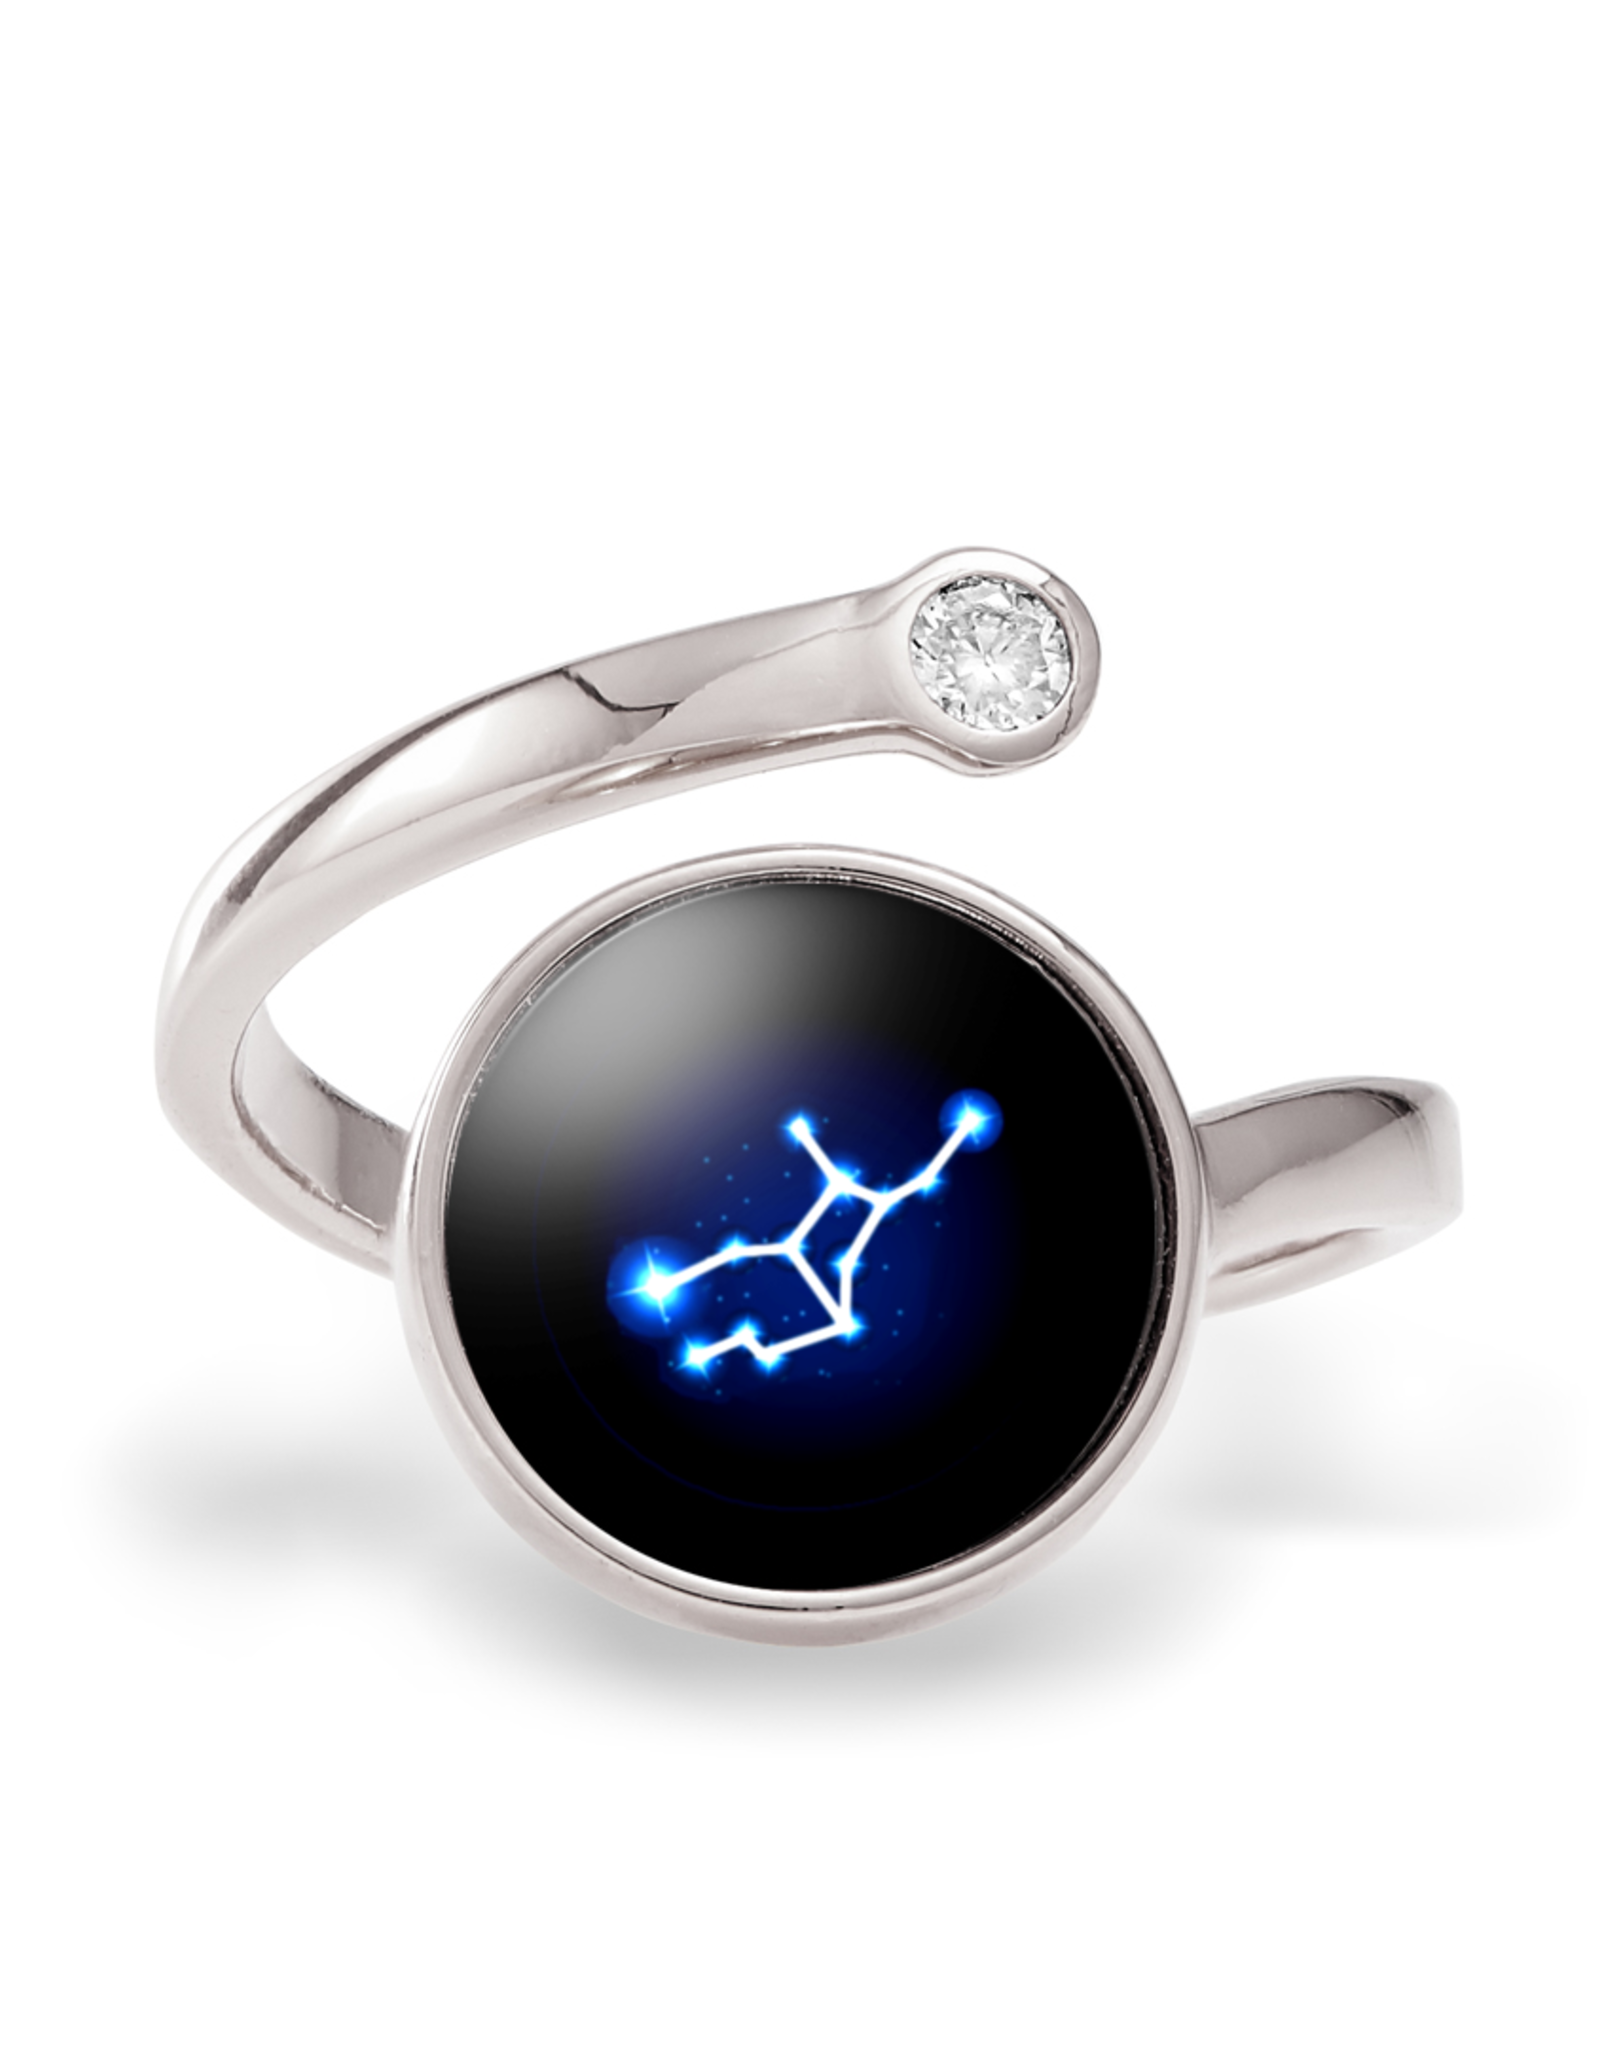 Moonglow Astral Cosmic Ring - Silver